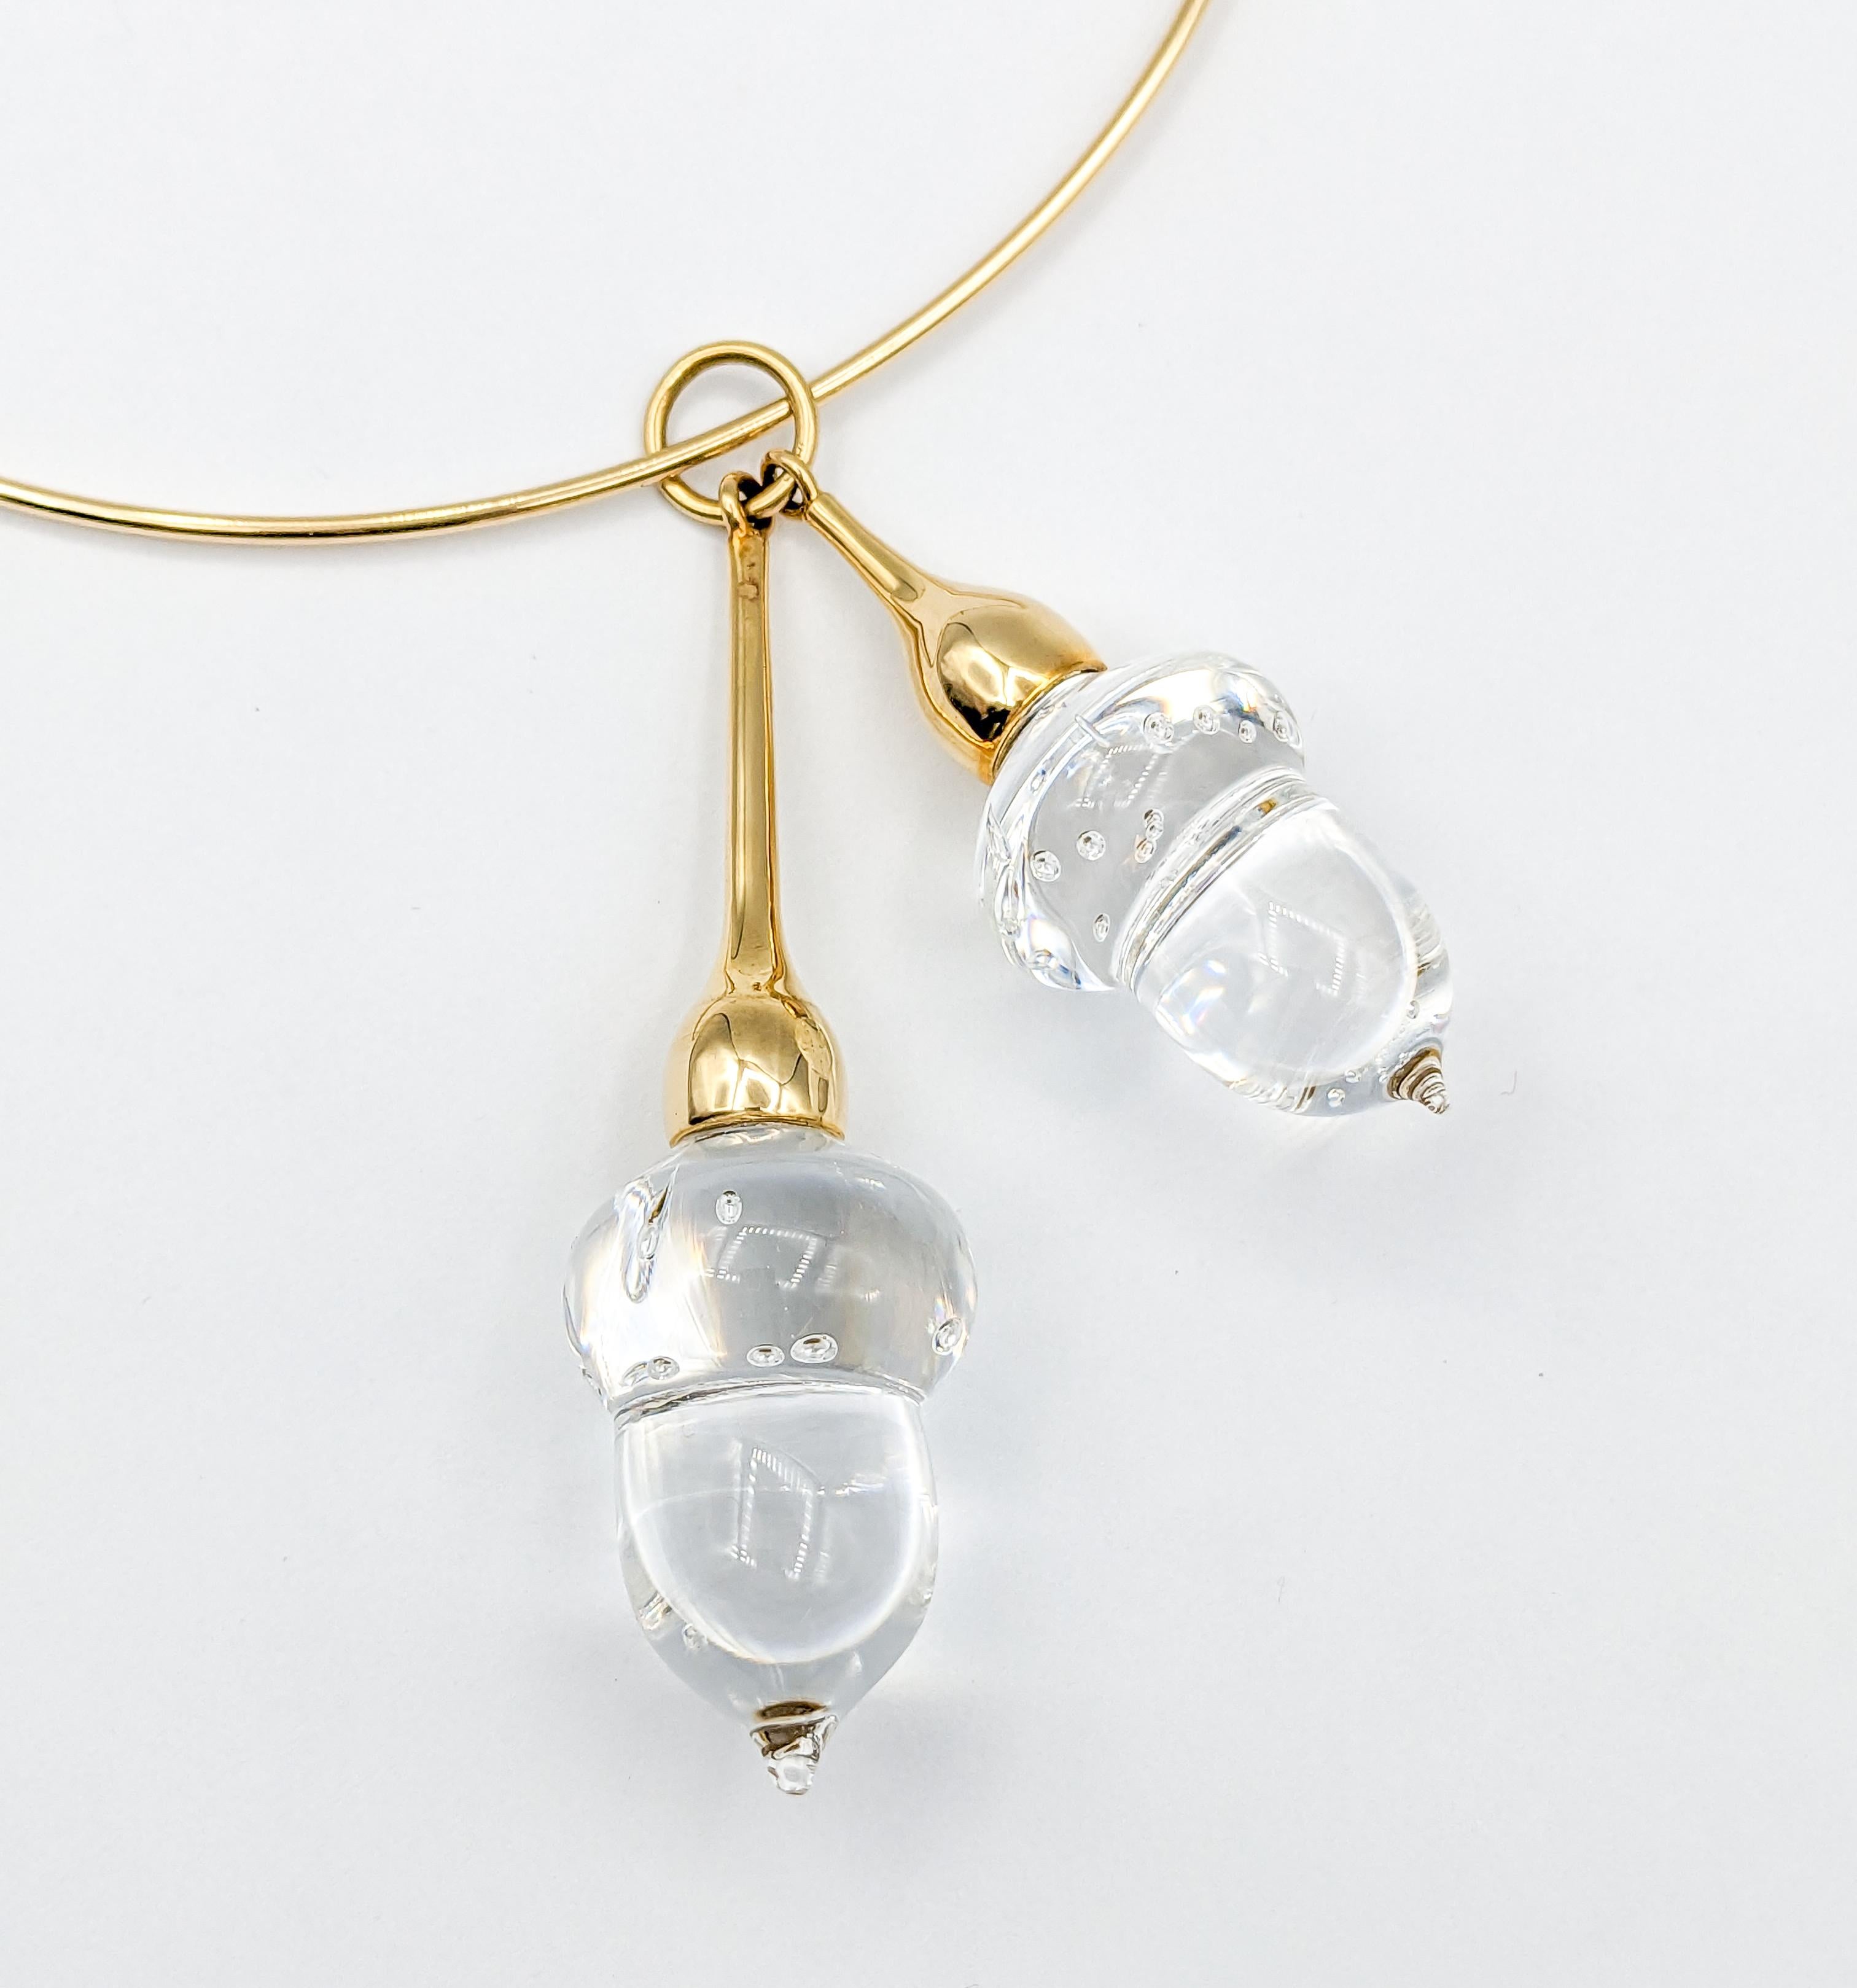 Steuben Glass Acorn Necklace in Gold 2